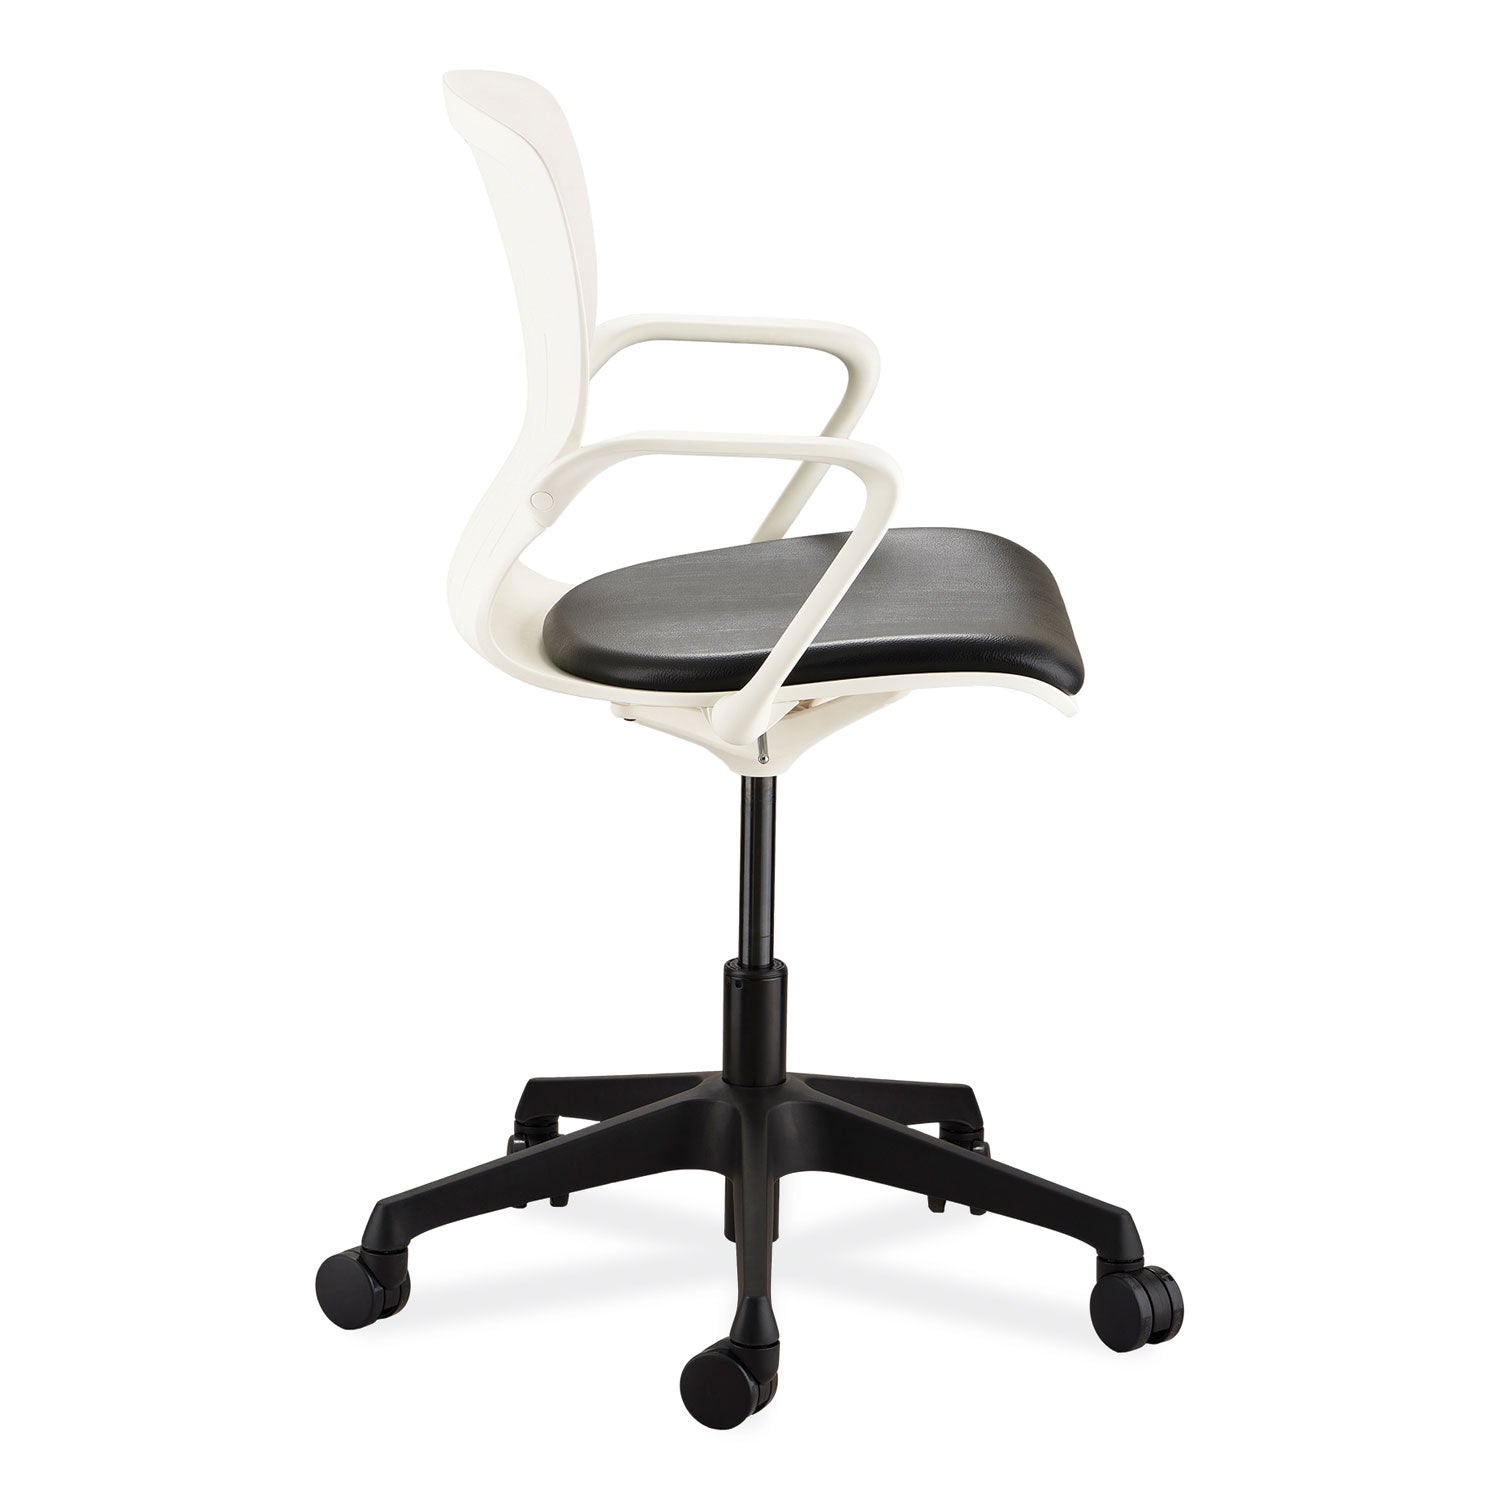 shell-desk-chair-supports-up-to-275-lb-17-to-20-high-black-seat-white-back-black-white-base-ships-in-1-3-business-days_saf7013wh - 2